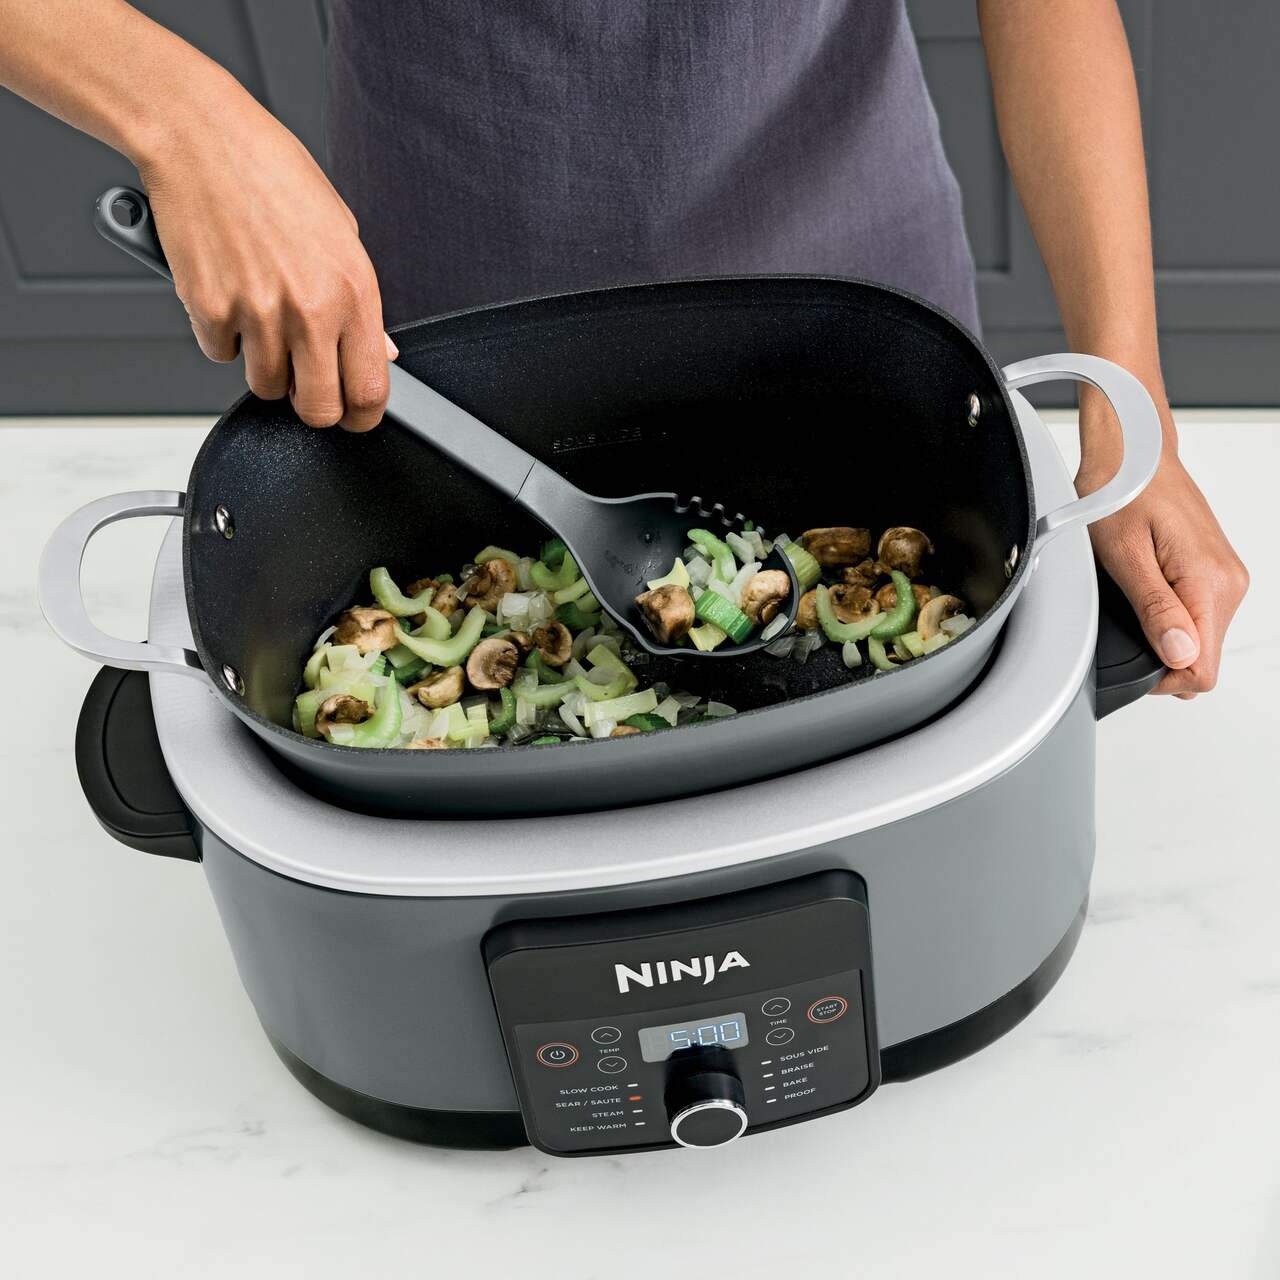 https://media-www.canadiantire.ca/product/living/kitchen/kitchen-appliances/0430326/ninja-8-in-1-function-possible-cooker-8-5-qt-50c279af-a6ad-4ad8-b97e-d65abd074c11-jpgrendition.jpg?imdensity=1&imwidth=1244&impolicy=mZoom